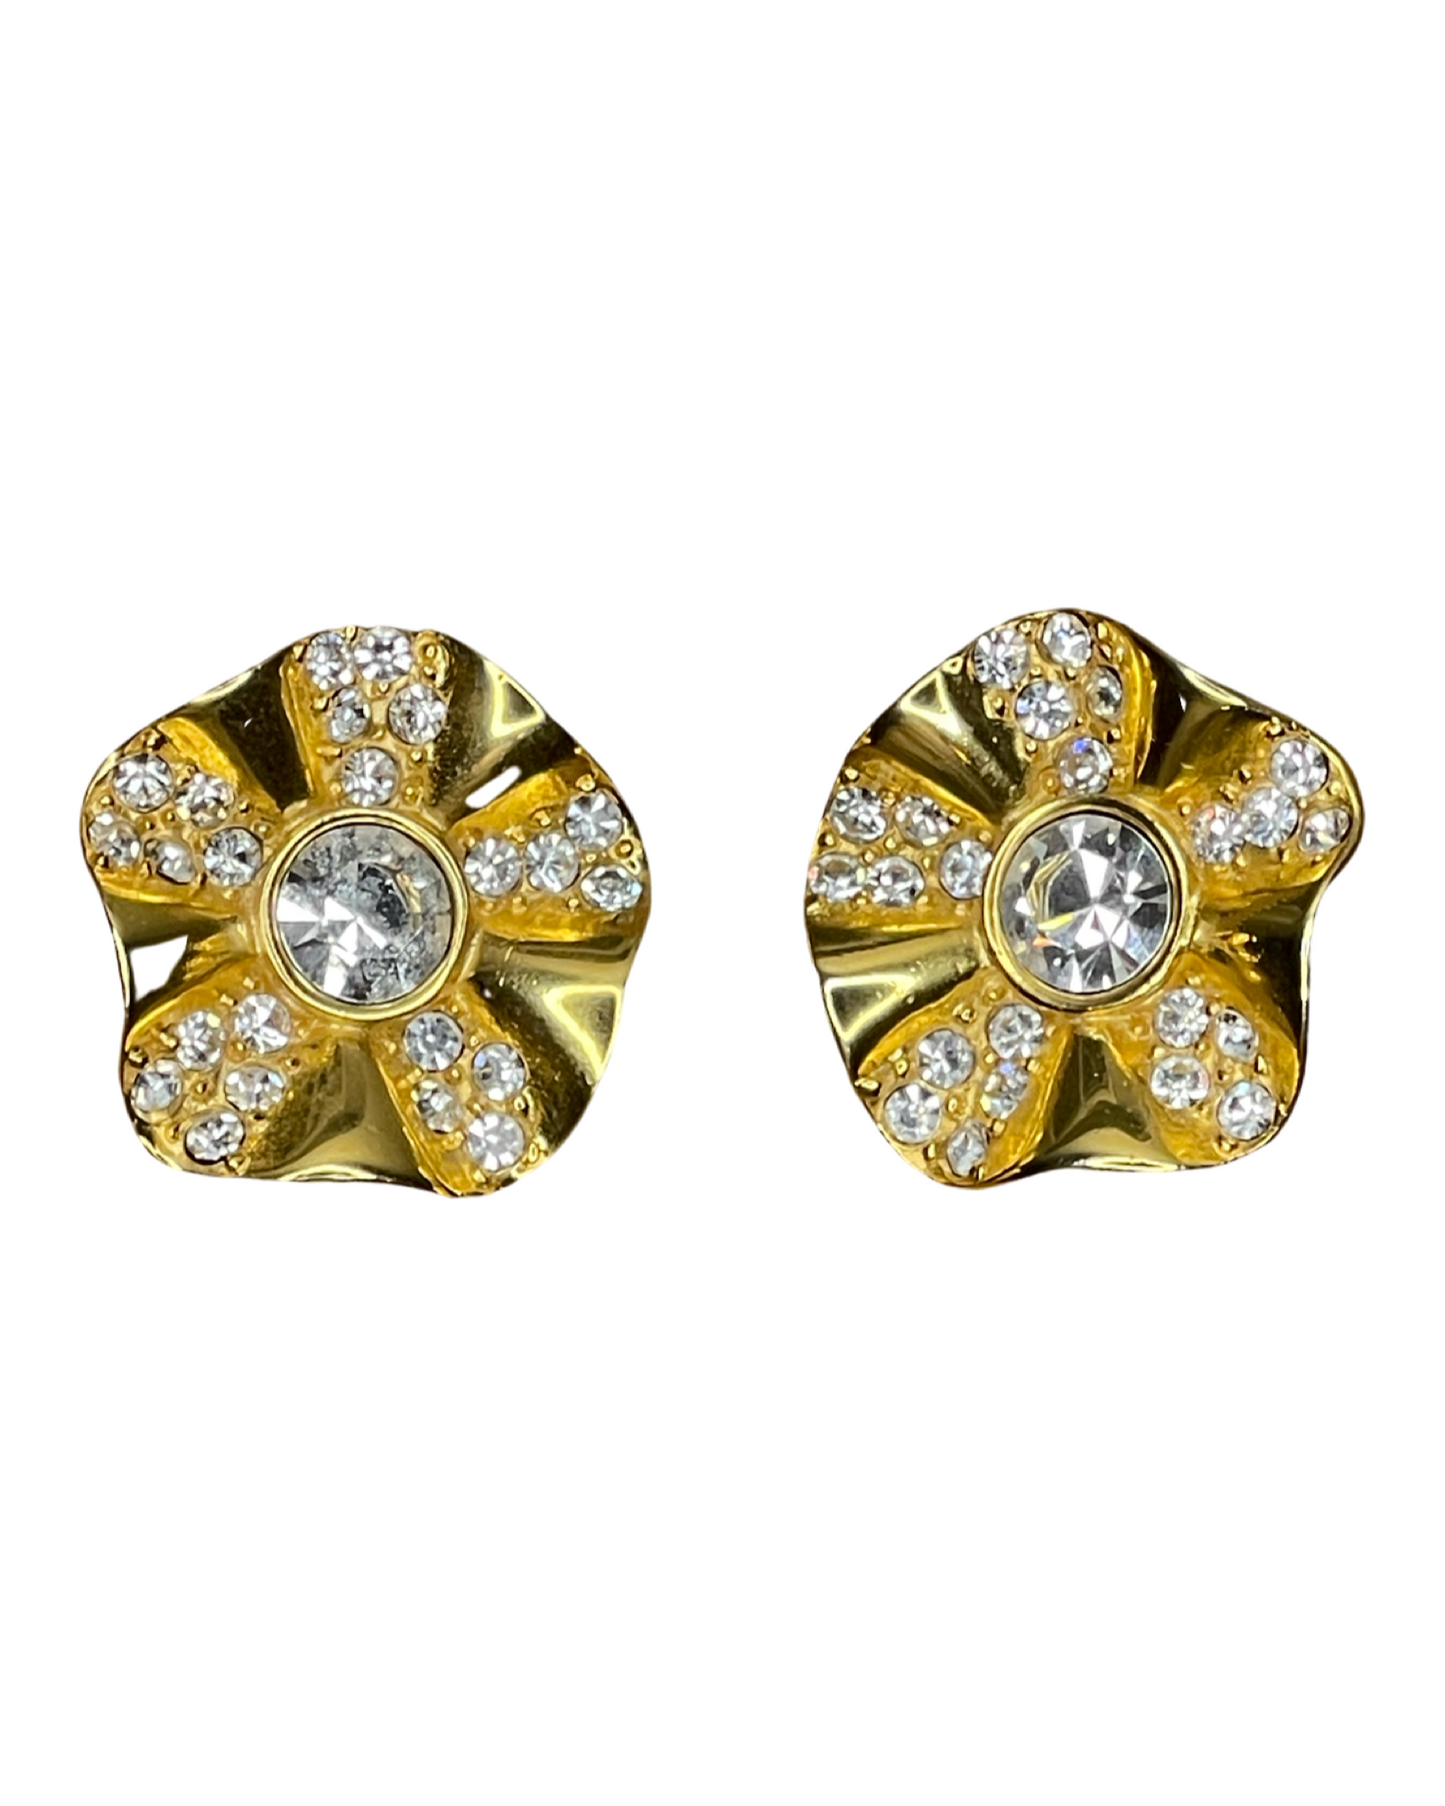 Glam Vintage Givenchy Earrings